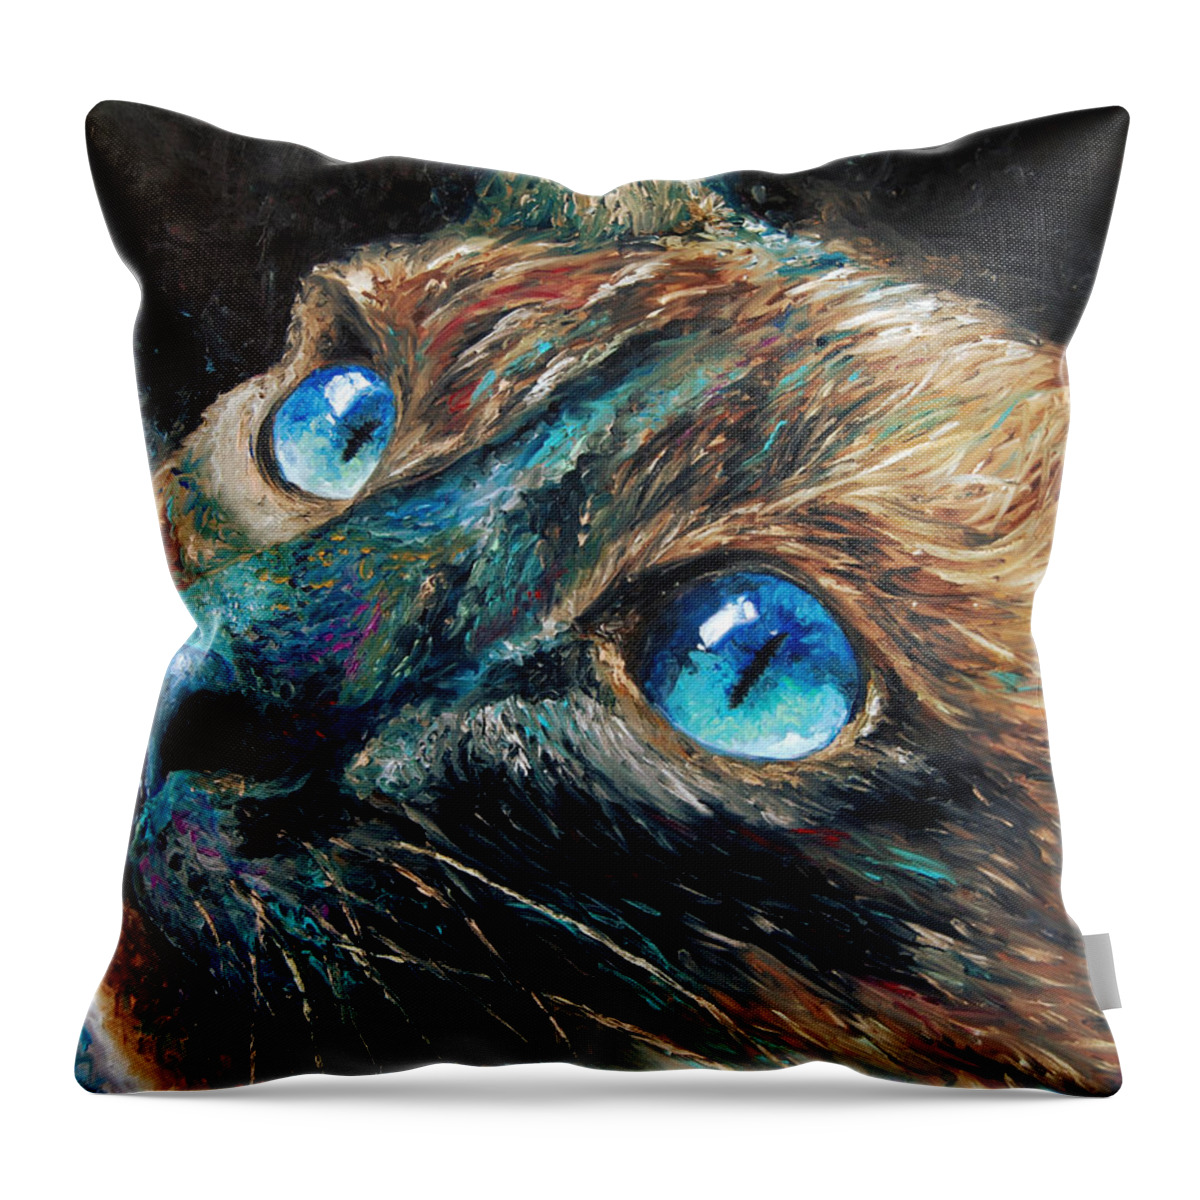 Catart Throw Pillow featuring the painting Azul by Hafsa Idrees